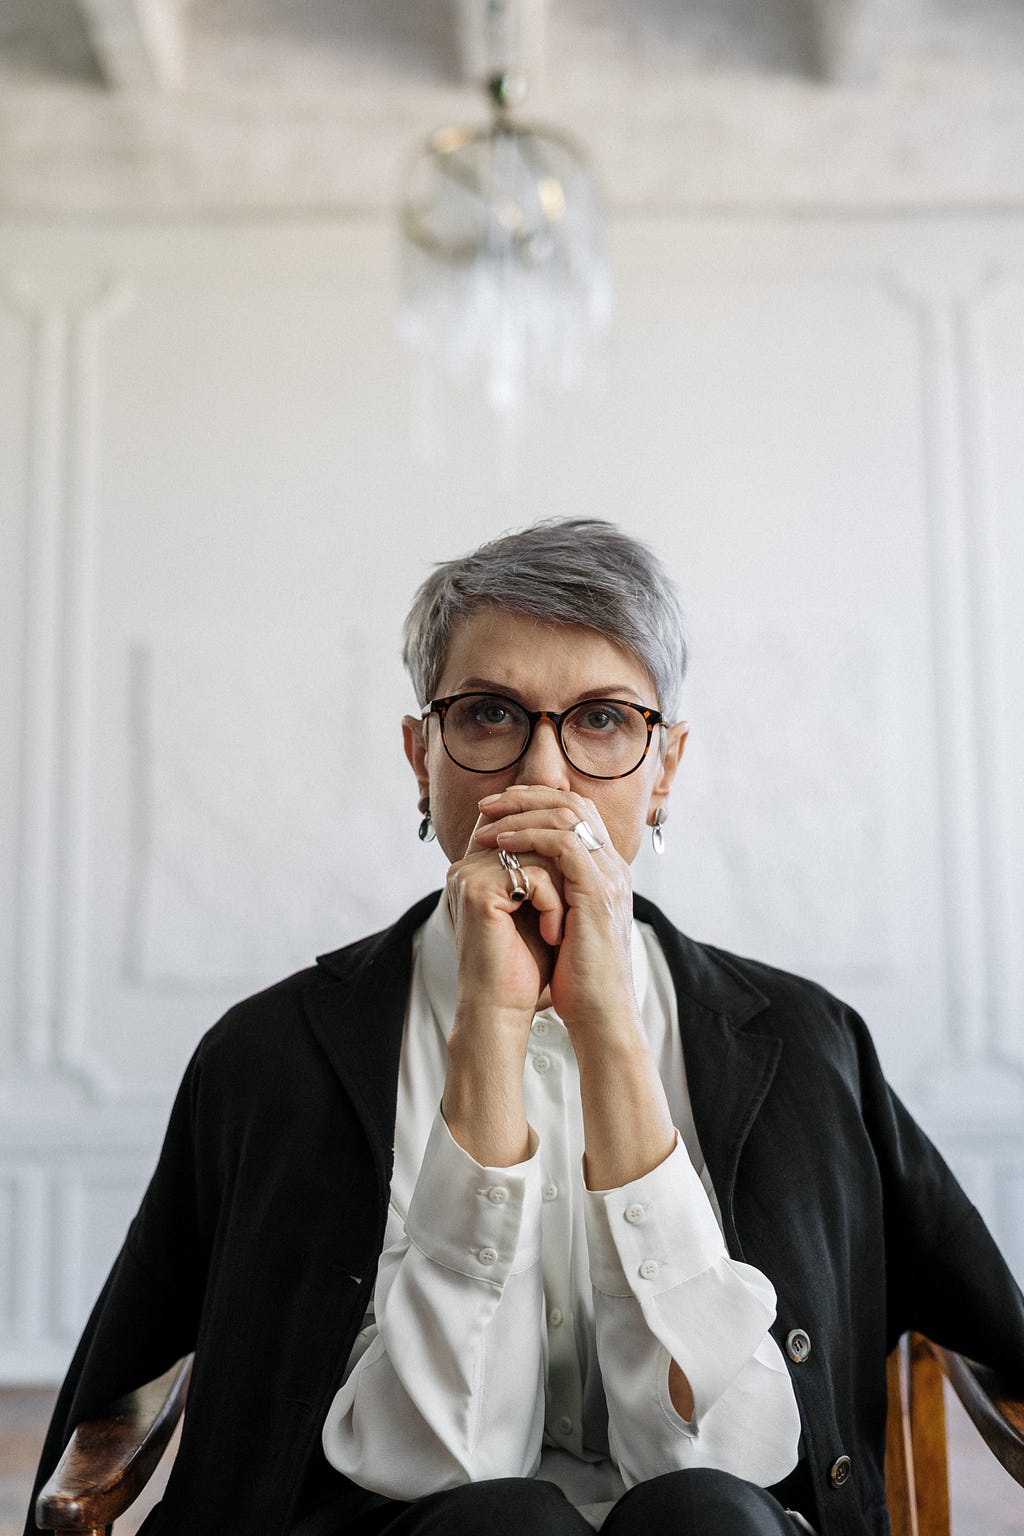 A woman in her late 50s/early 60s stairs straight at the camera looking stern with her hands folded in front of her mouth.